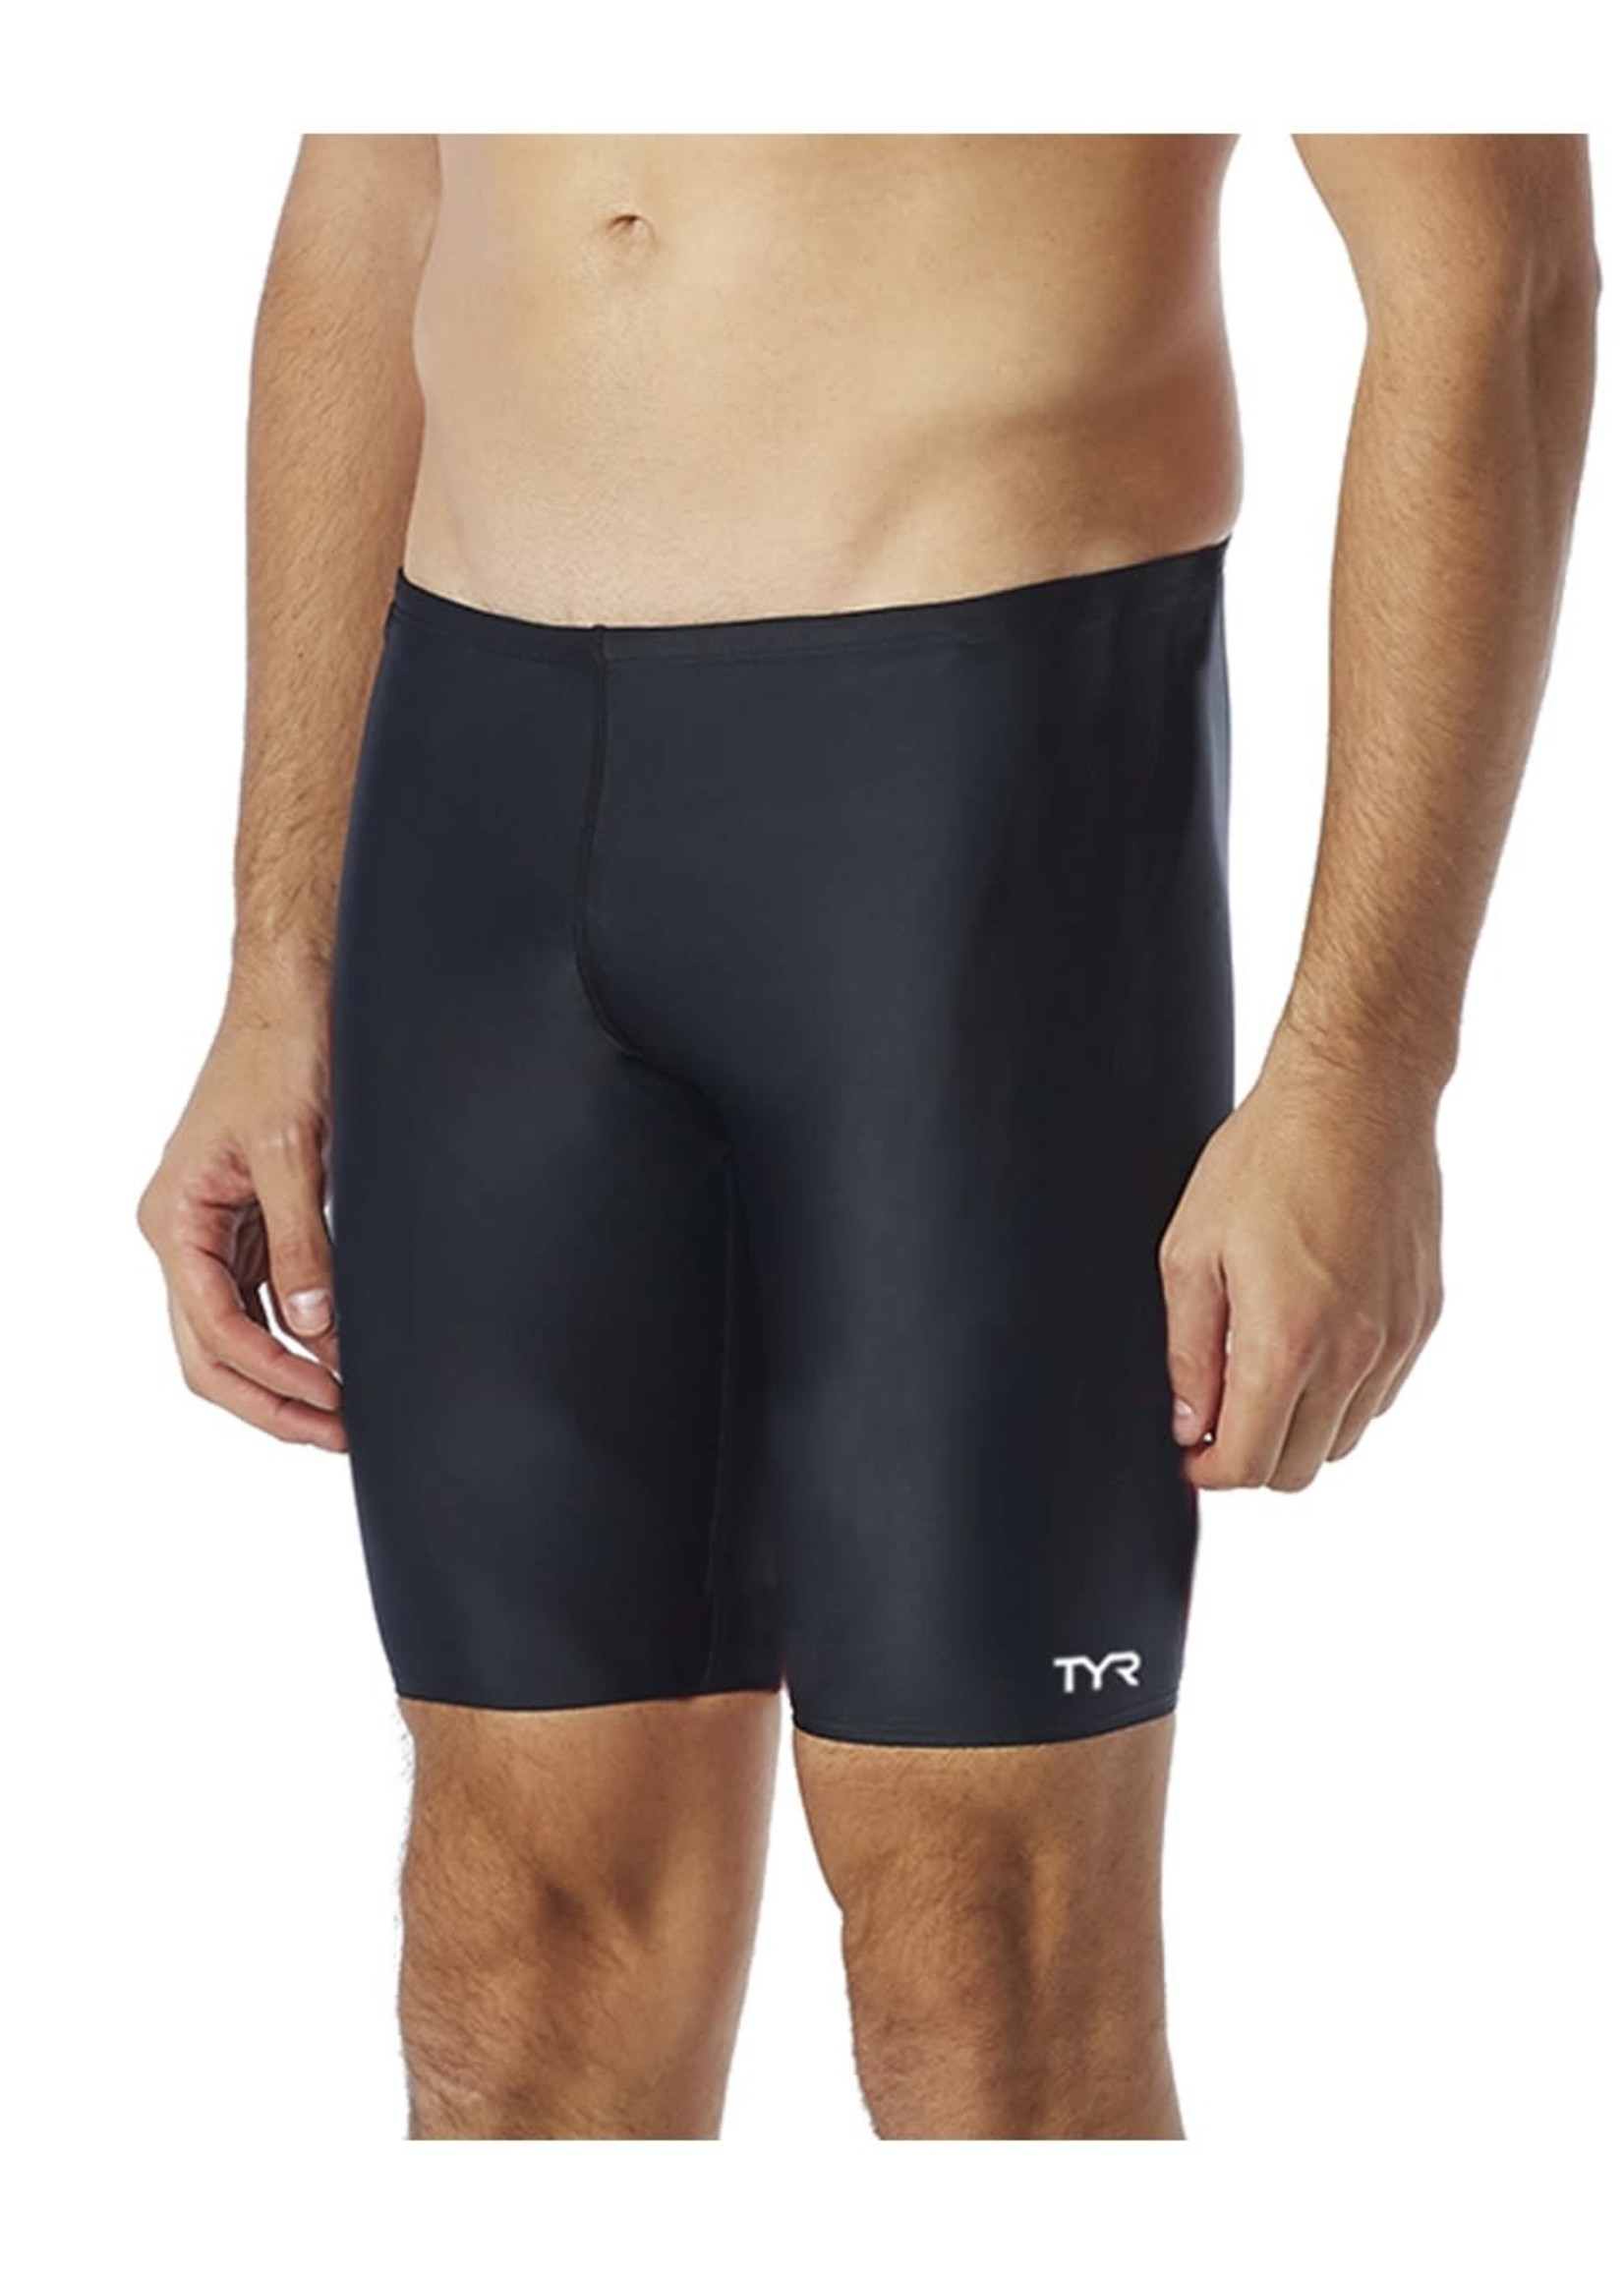 TYR SOLID MALE JAMMER